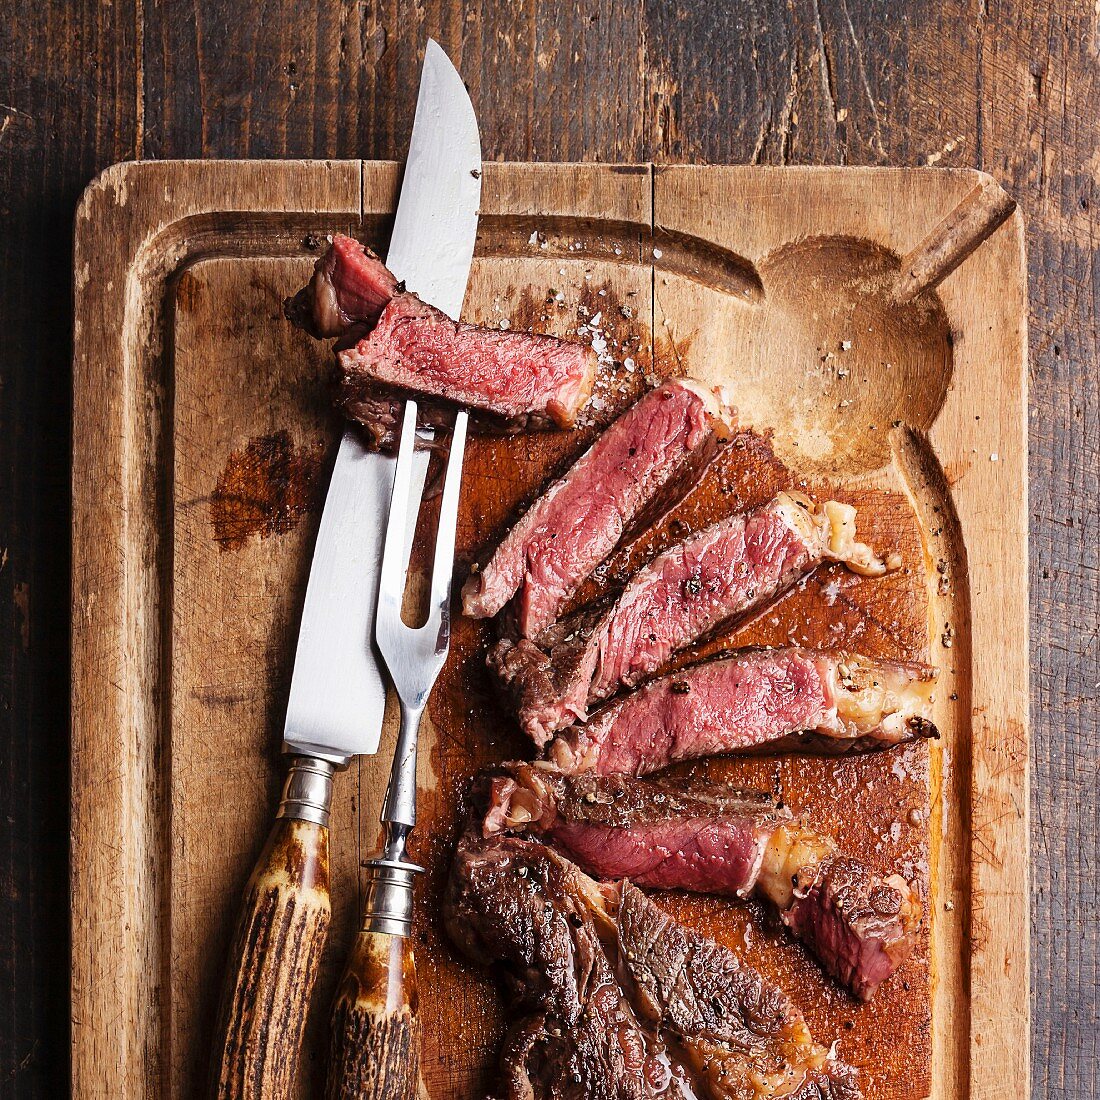 Medium rare Beef steak Ribeye with knife and fork for meat on cutting board on dark wooden background